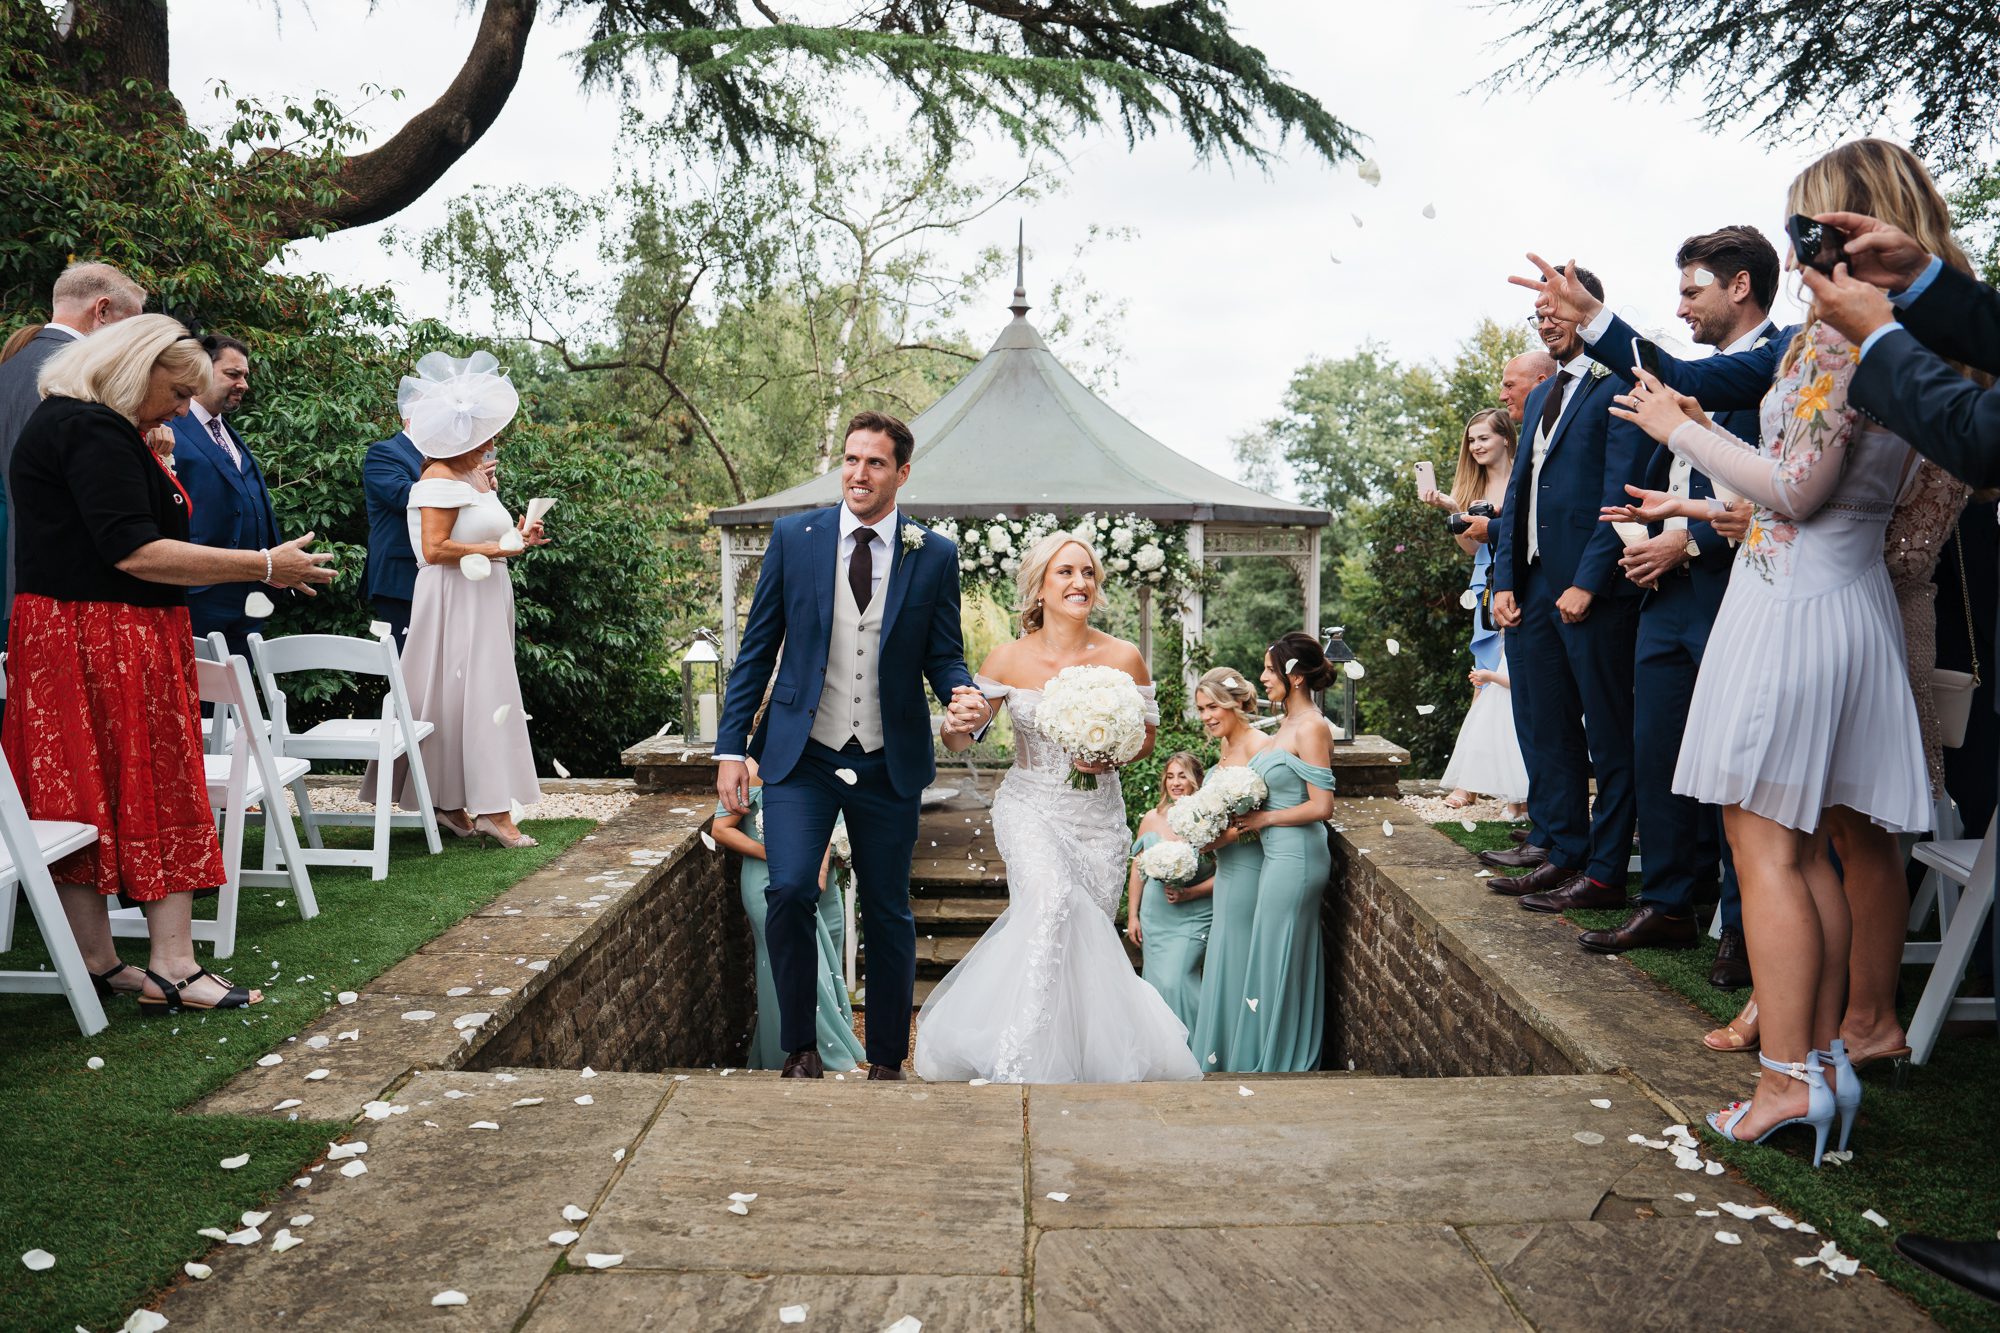 Wedding photography recommended by Pennyhill Park.